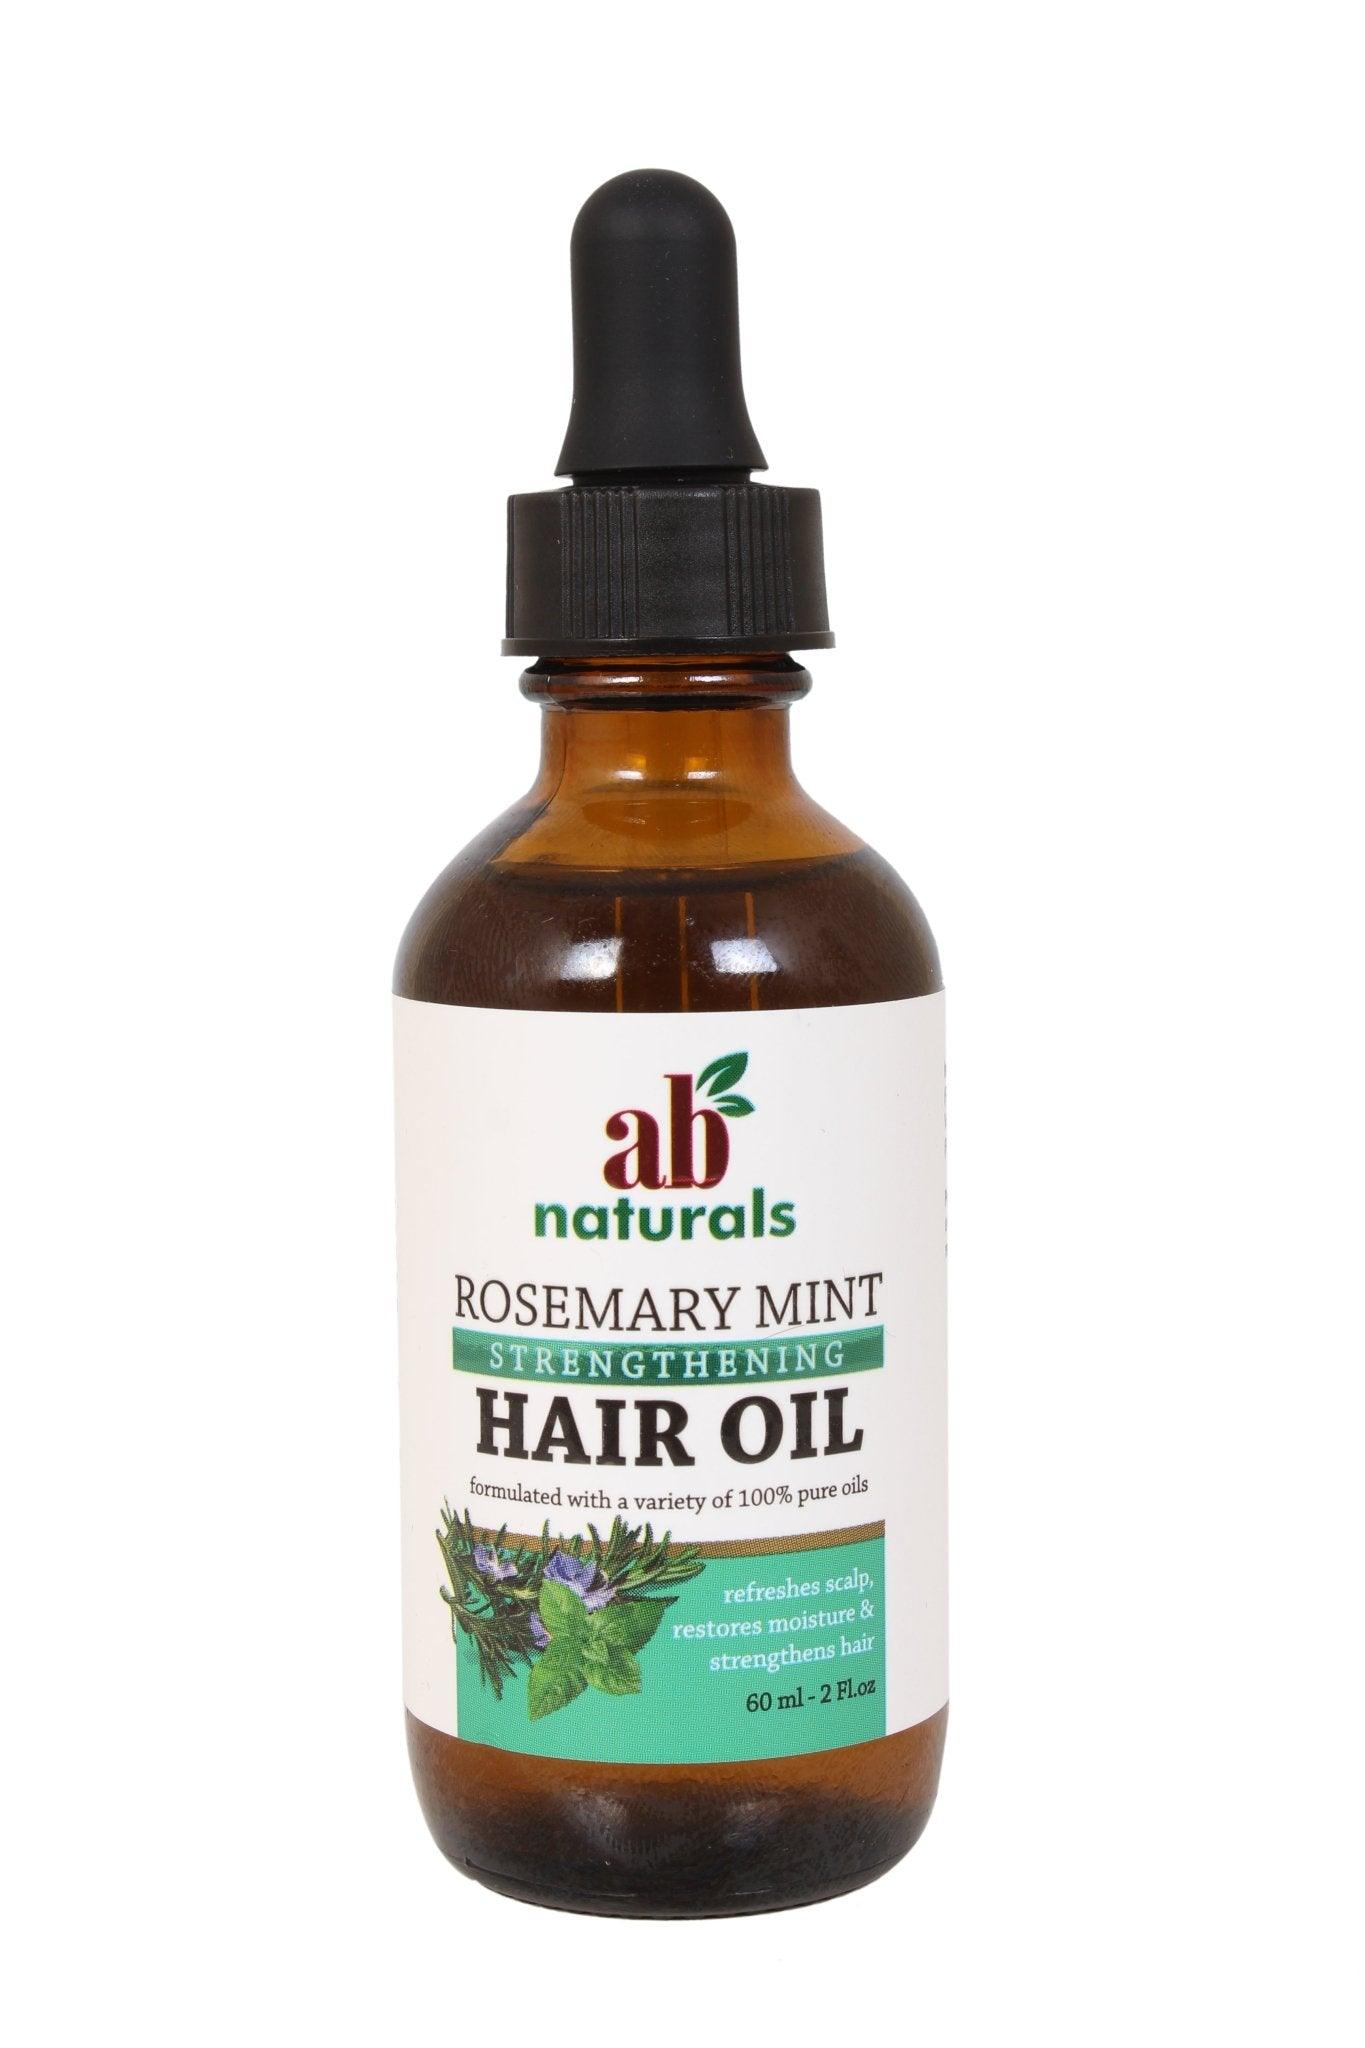 Ab Naturals Rosemary Mint Hair Oil 2 fl.oz (60ml) - African Beauty Online